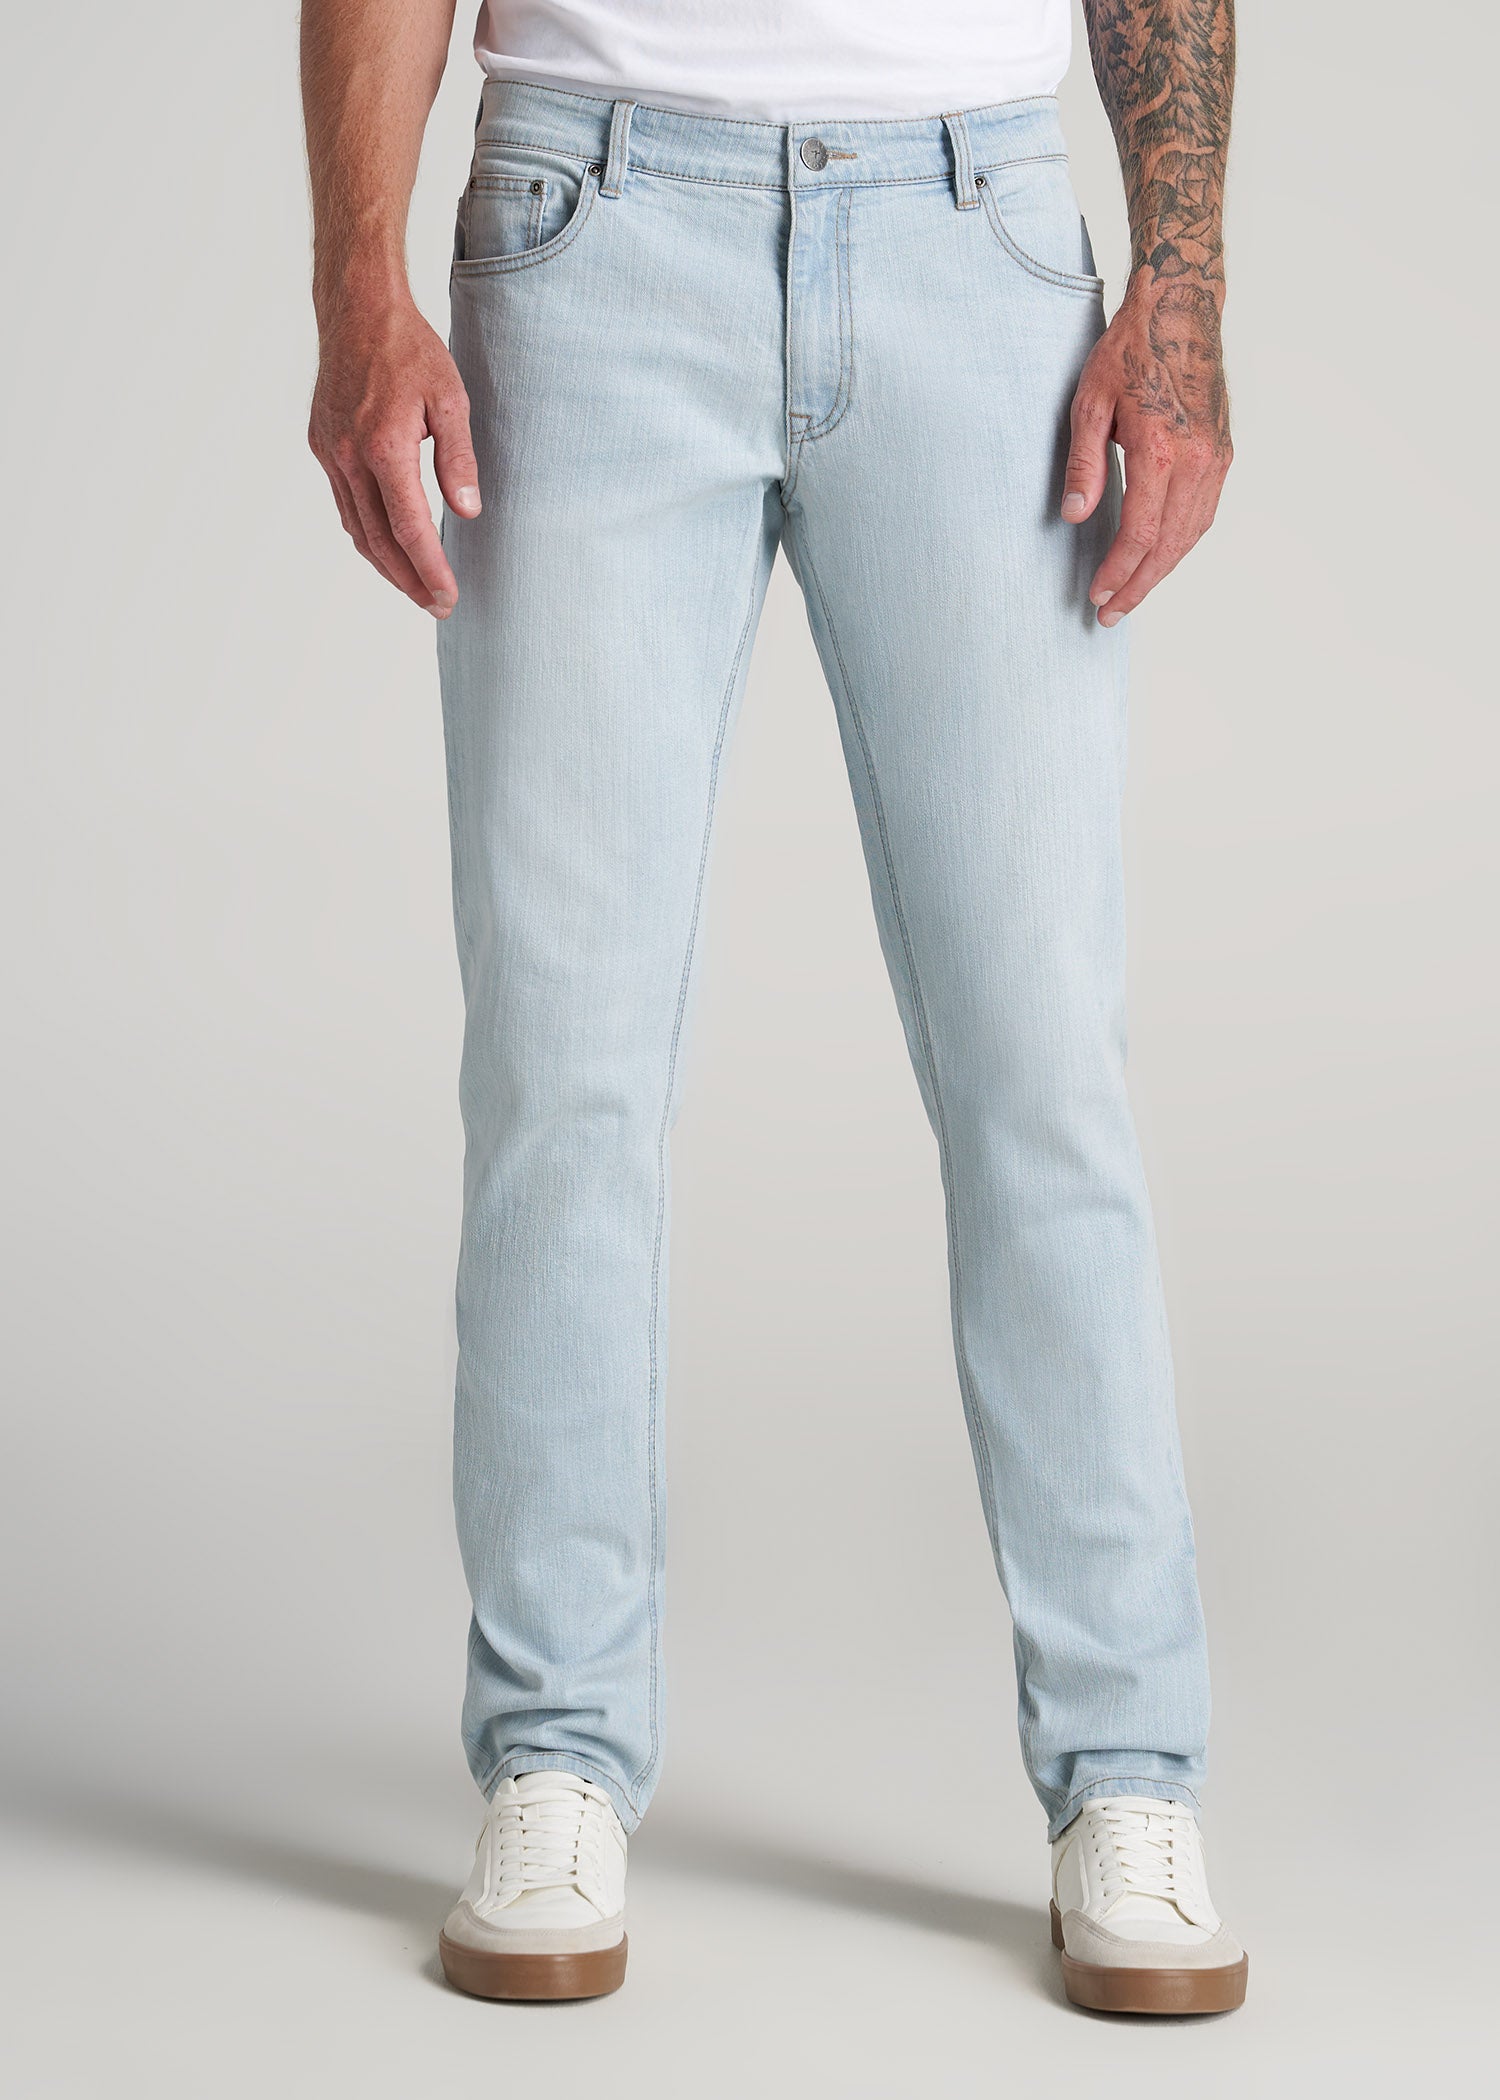 Carman Tapered Jeans For Tall Men California Blue | American Tall